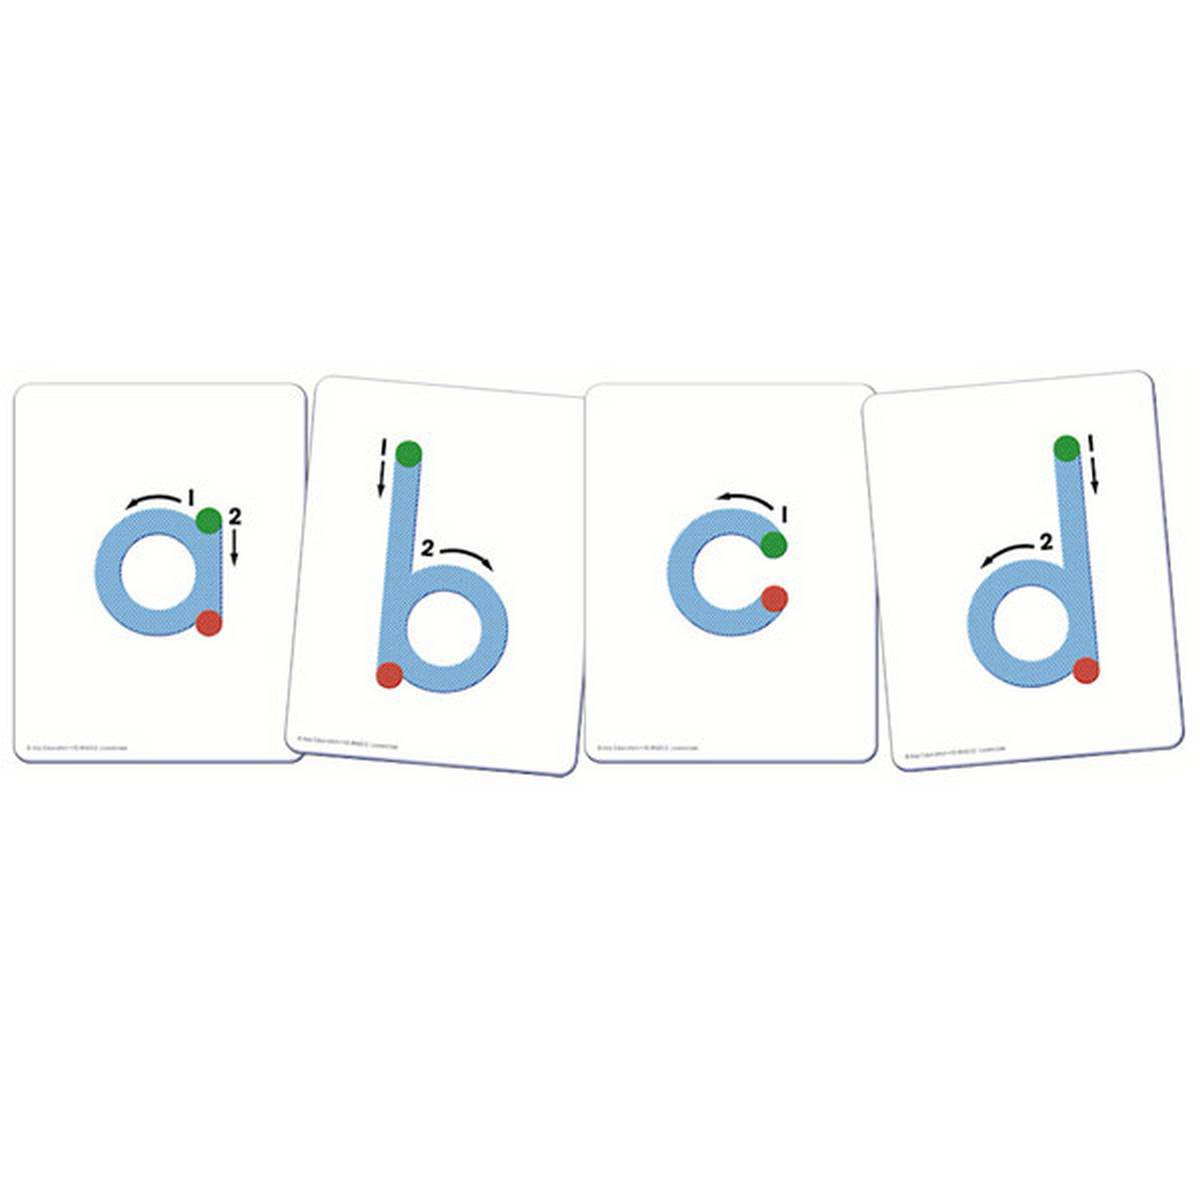 Textured Touch and Trace Letter Cards: Lowercase